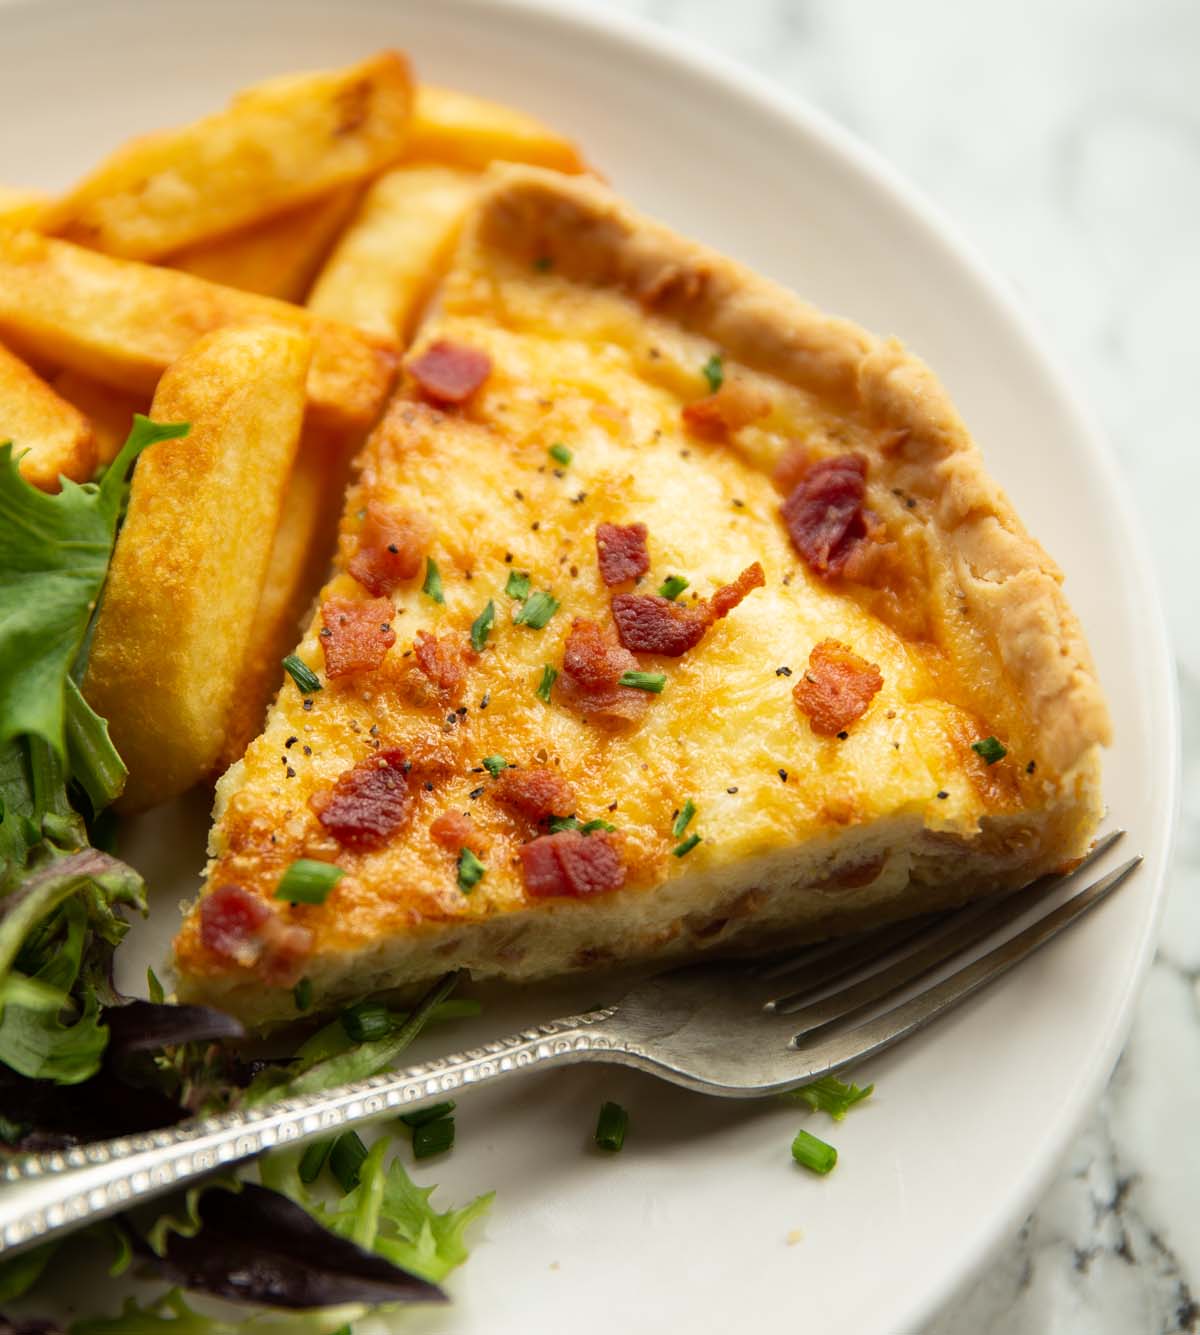 close up shot of slice of quiche lorraine on small white plate with chips and salad